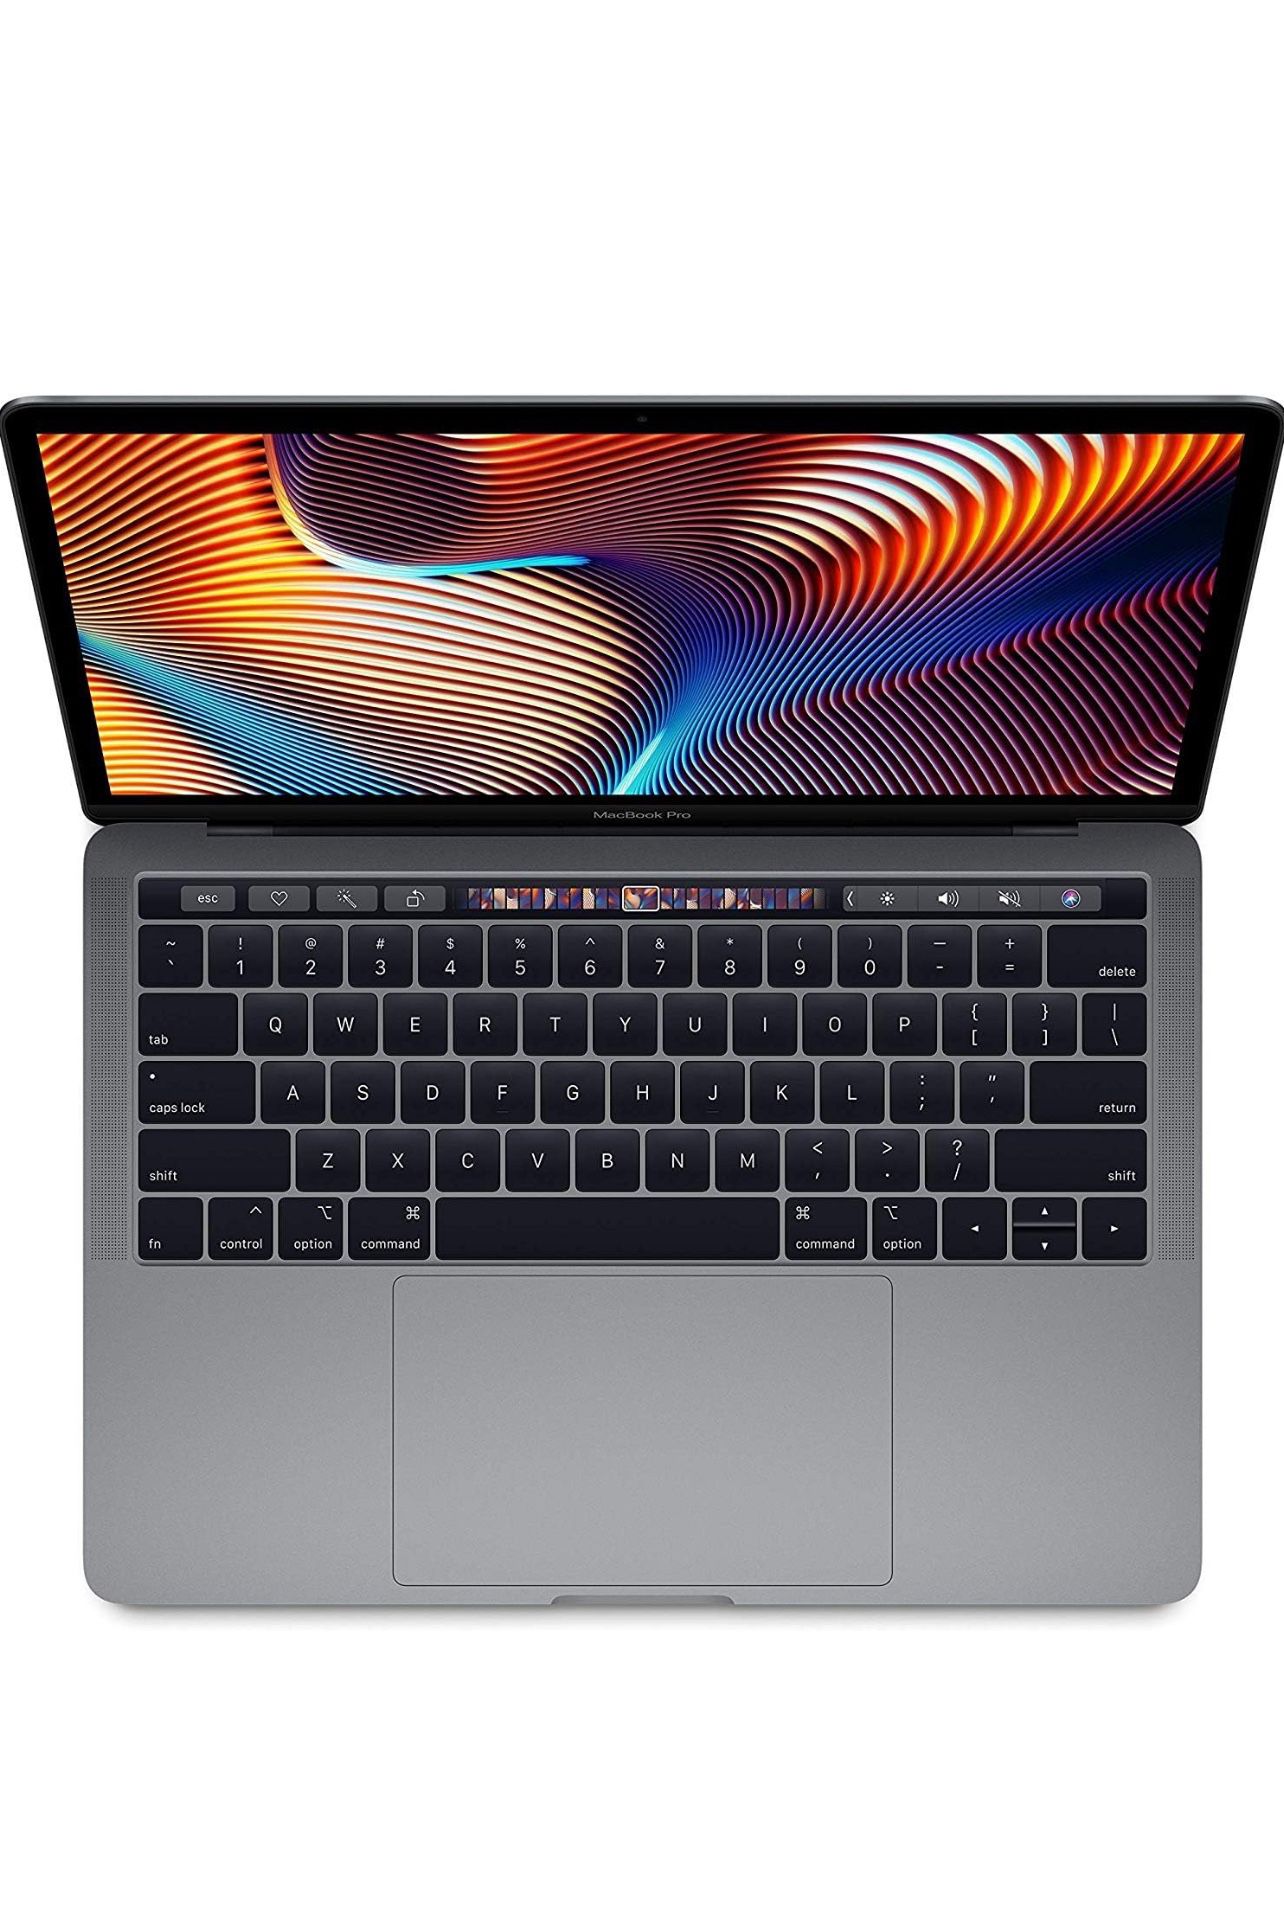 	 Apple - MacBook Pro - 13" Display with Touch Bar - Intel Core i5 - 8GB Memory - 256GB SSD - Space Gray (Used Excellent)